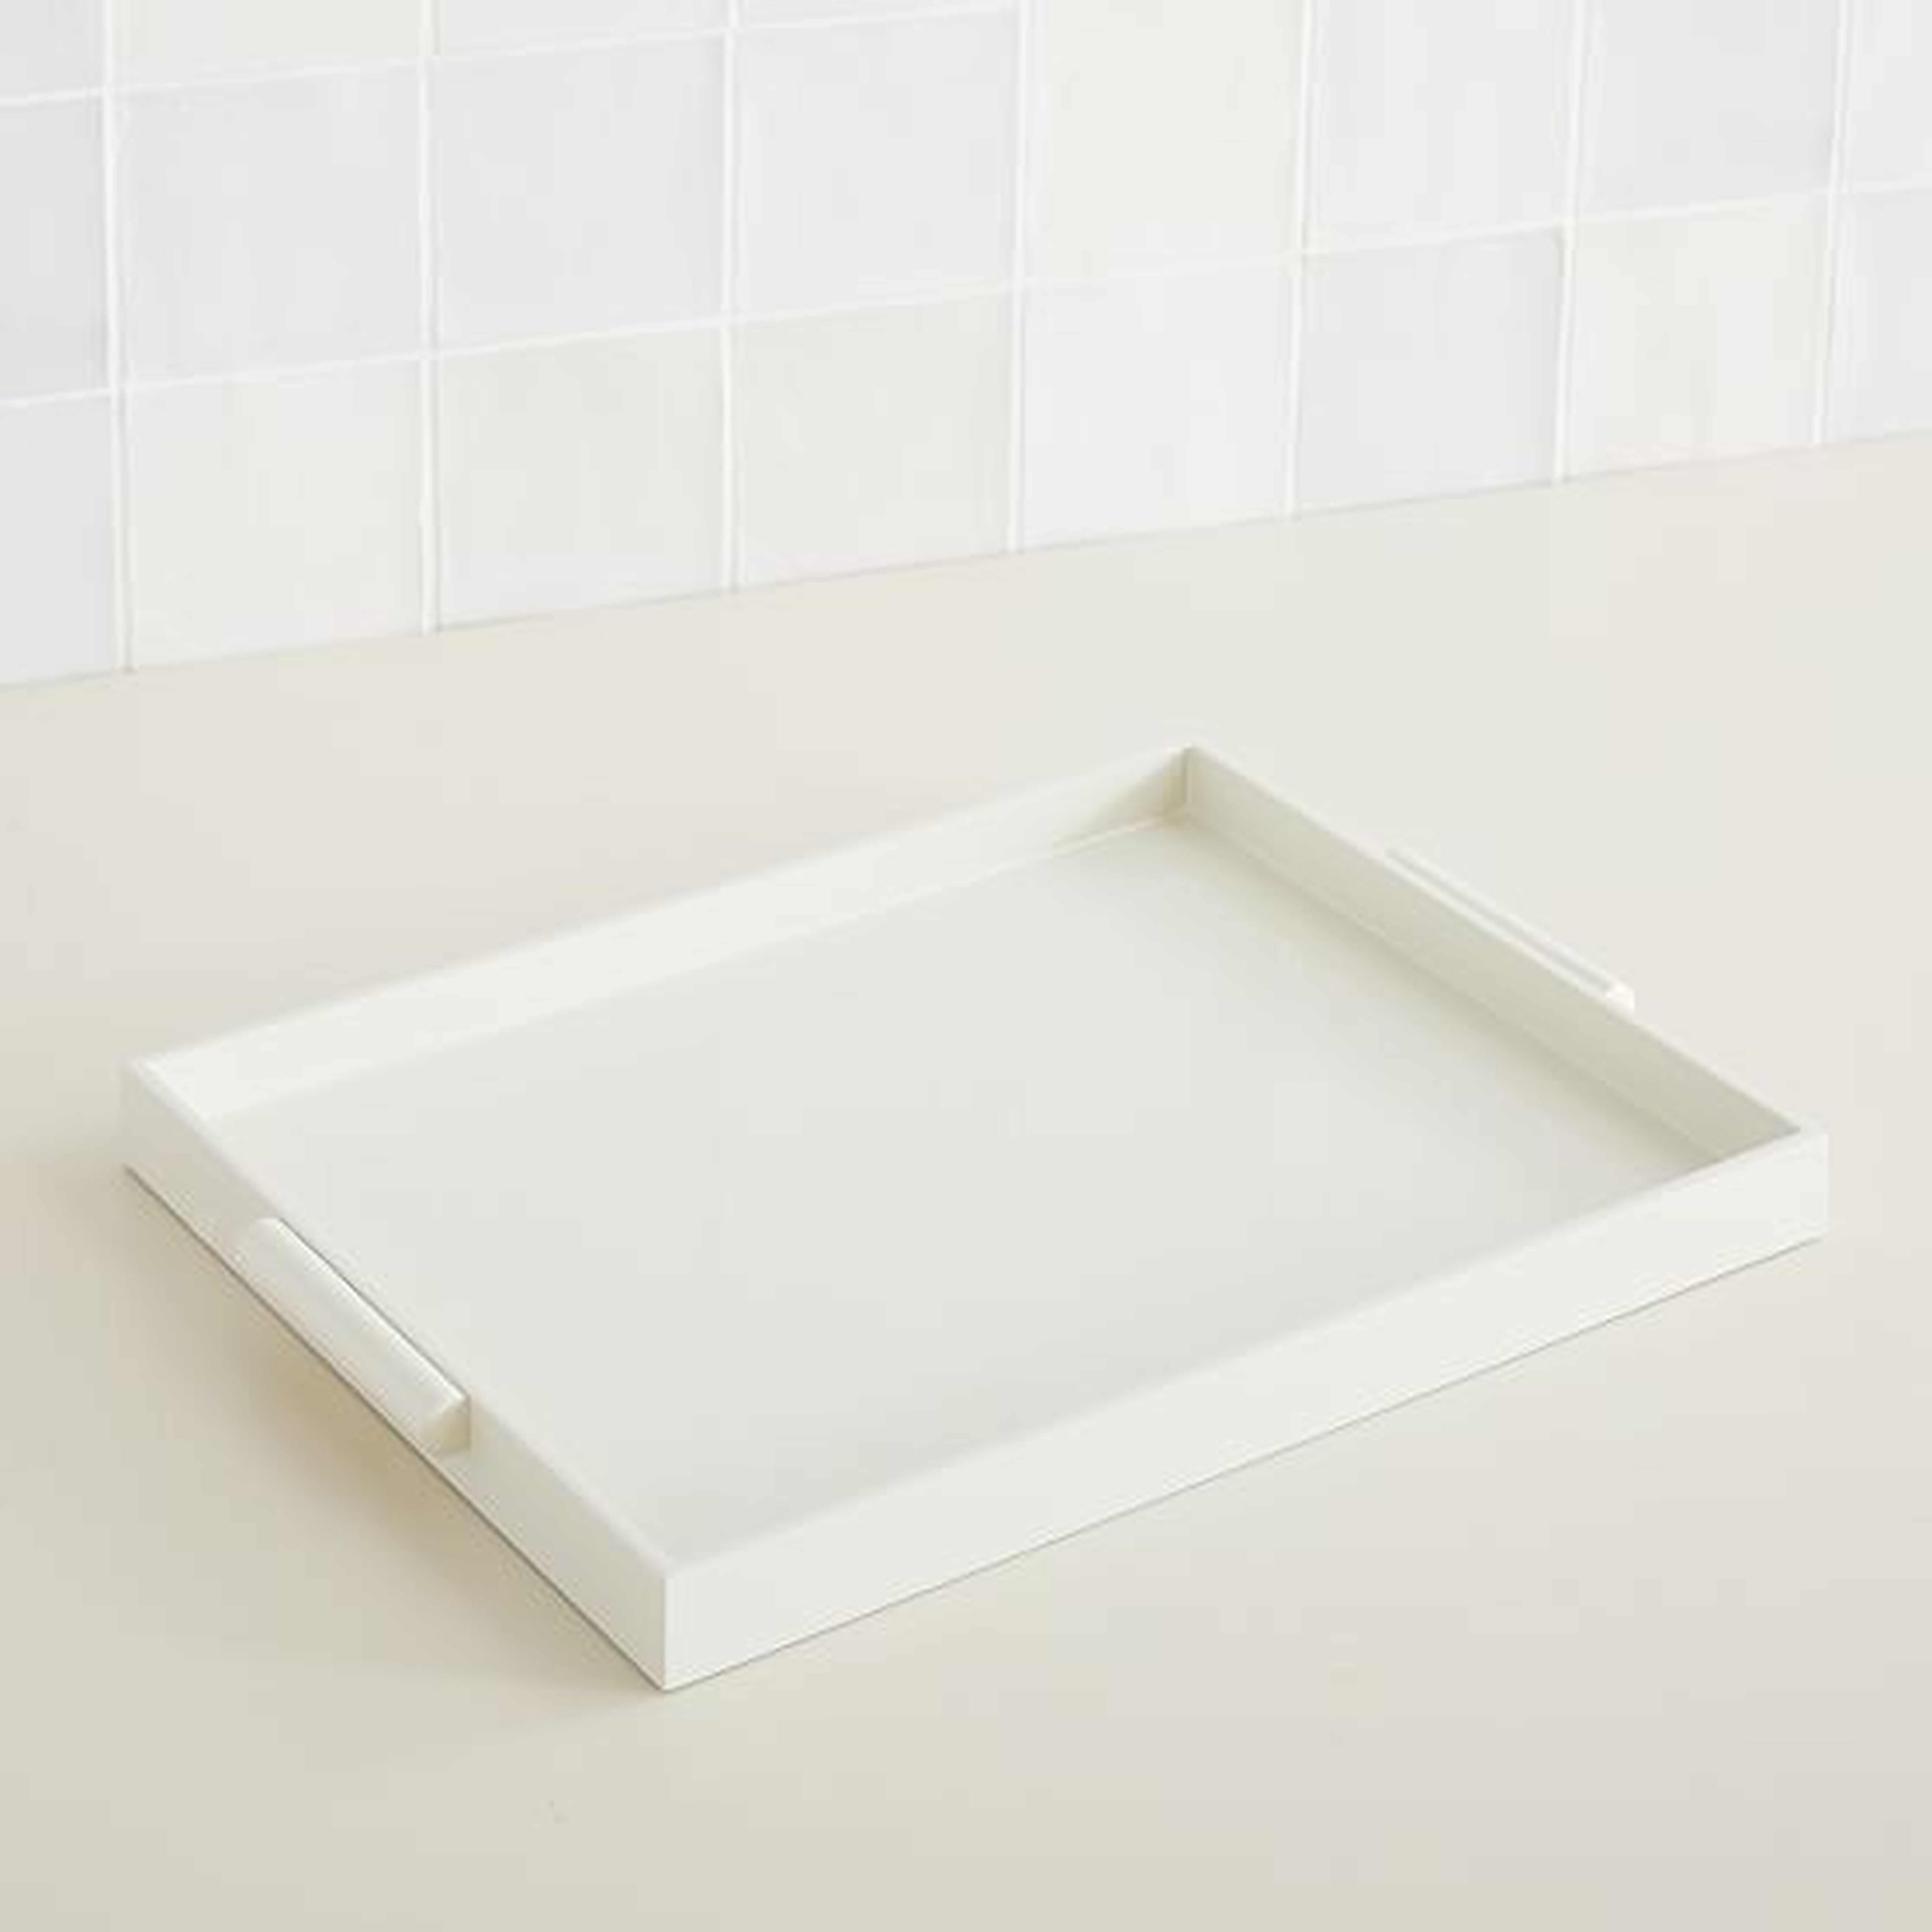 Barrel Handle Trays Rectangle Tray, Oyster, MDF Composite, 14"x18" - West Elm